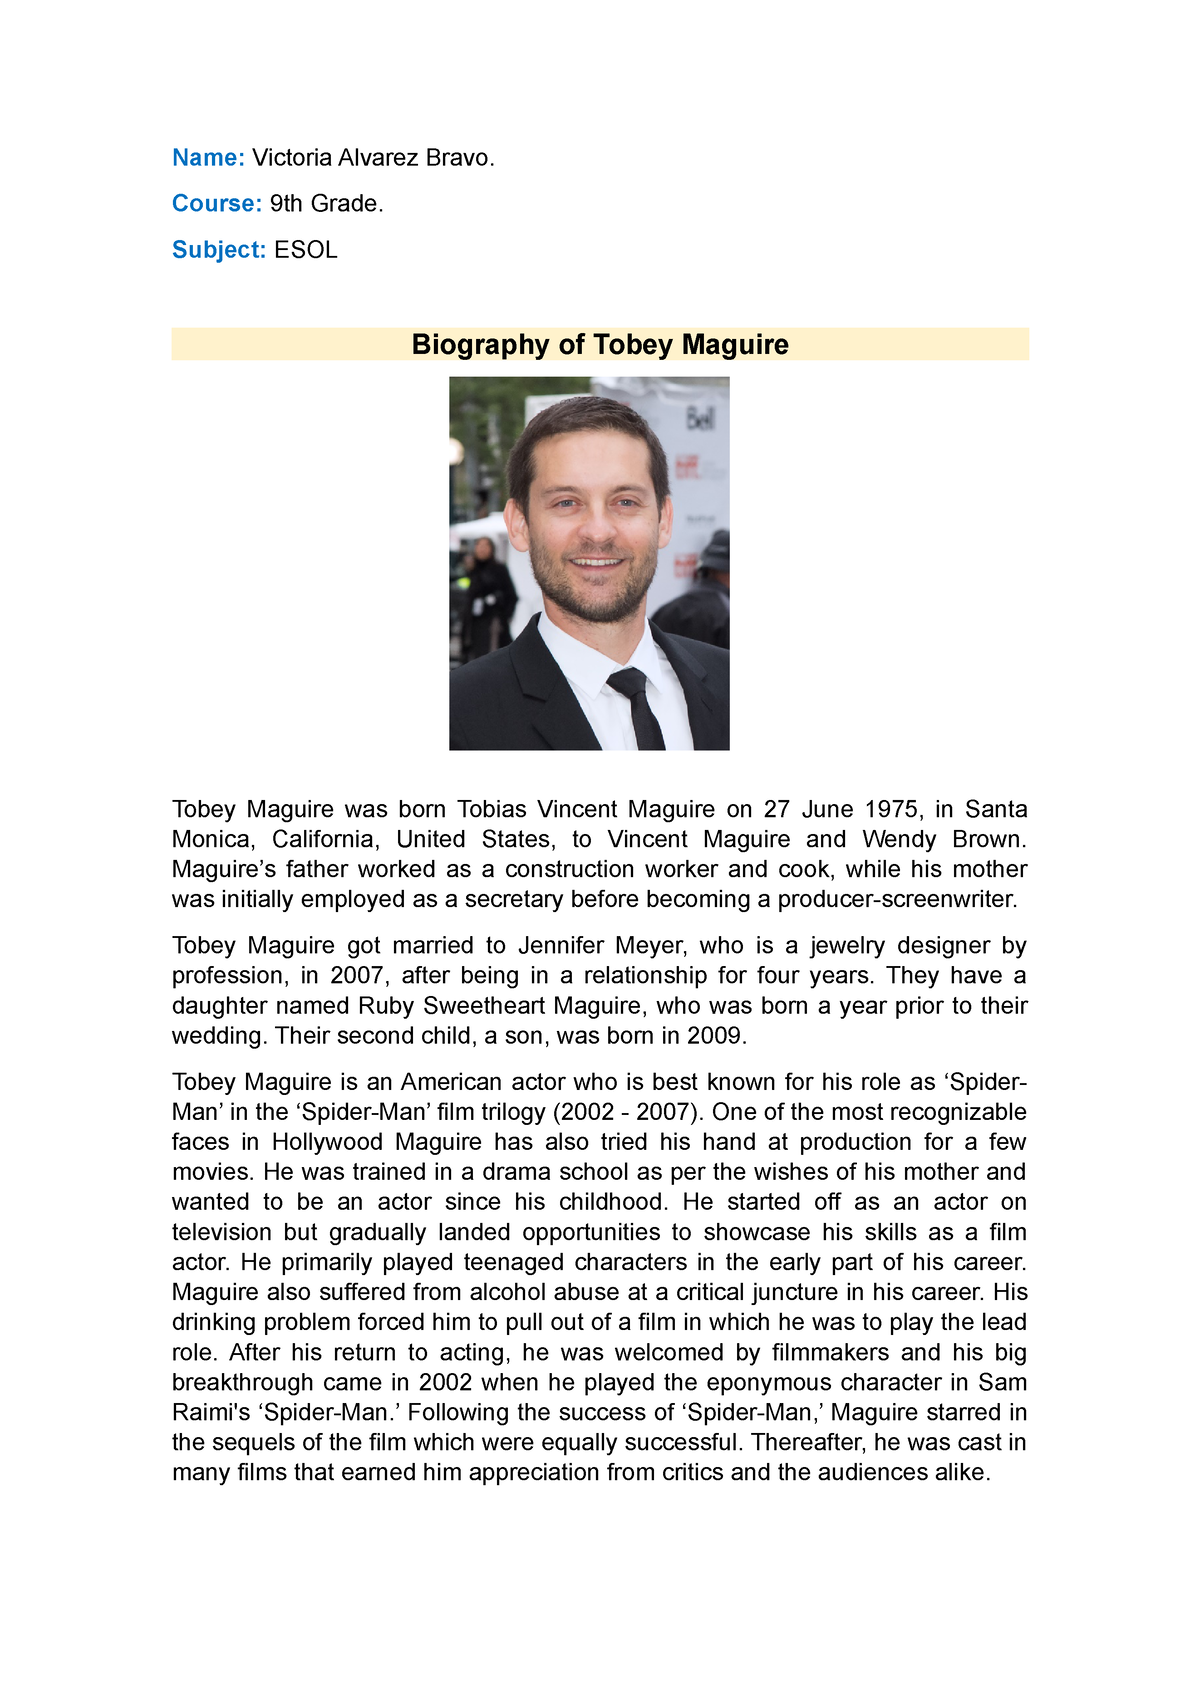 Tobey Maguire - Biography